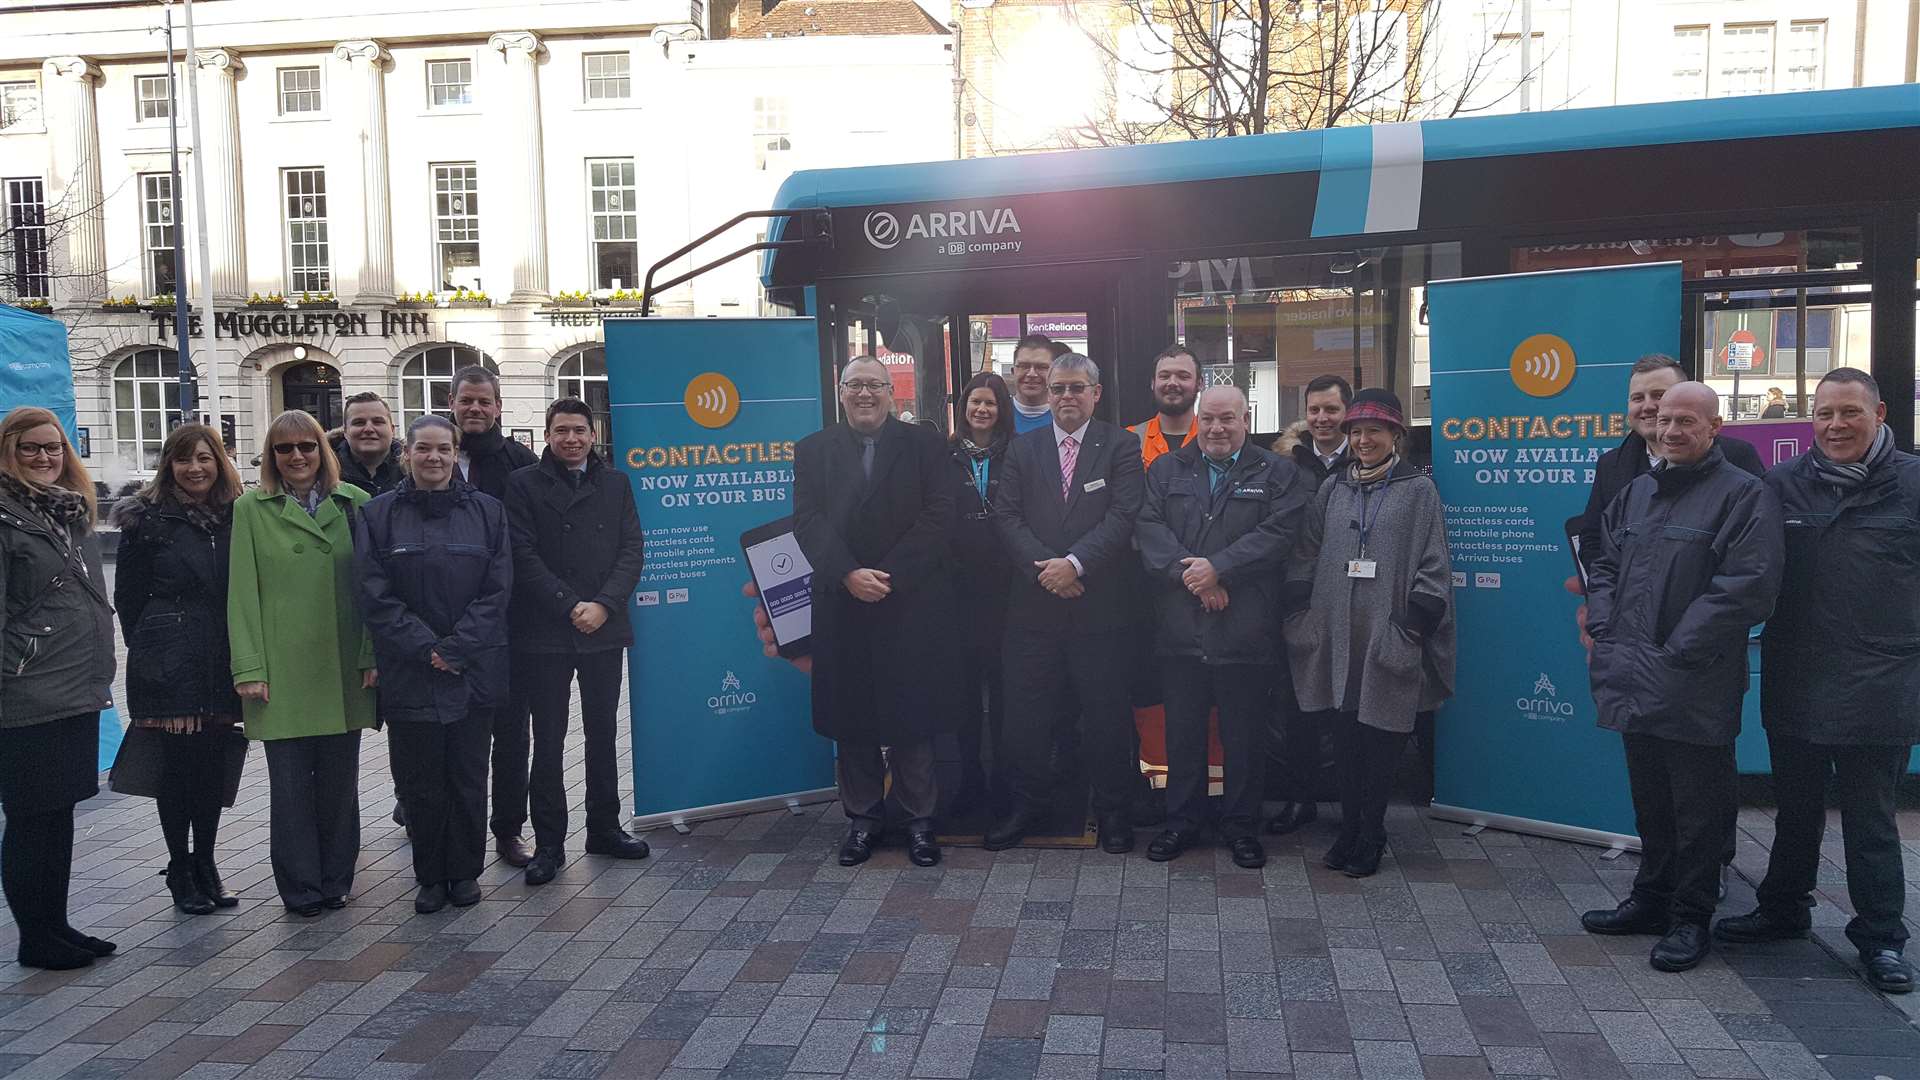 Cllr Martin Cox of Maidstone Borough Council and Nick Elsden, general manager of Arriva in Maidstone launch the contactless scheme in Jubilee Square, Maidstone